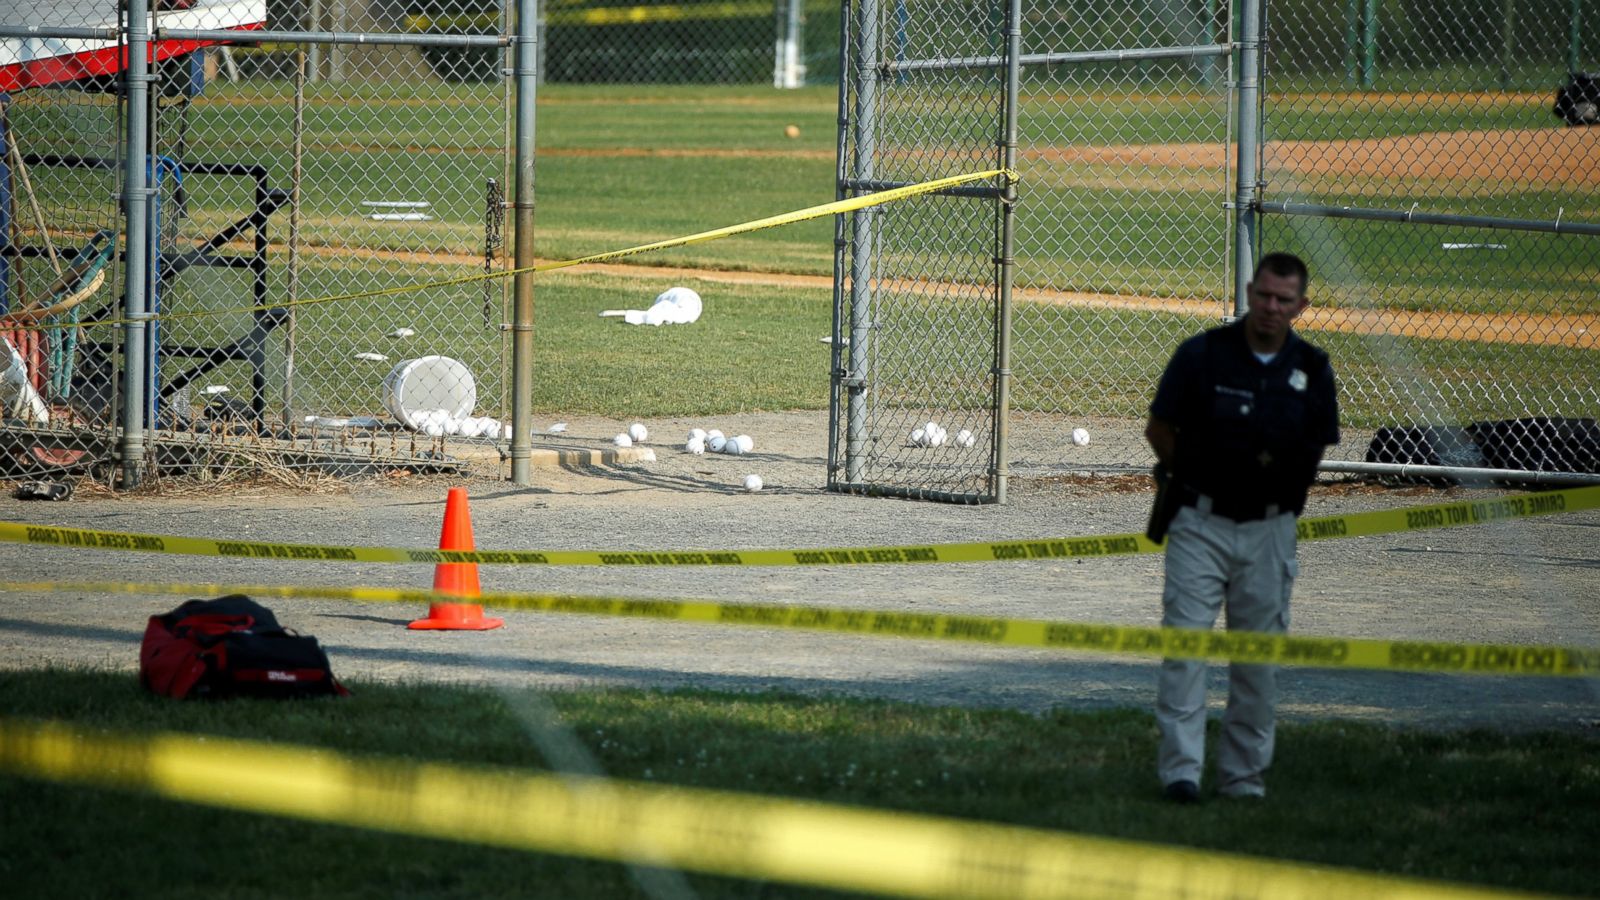 Scalise in critical condition after gunman opens fire at congressional baseball practice in Virginia - ABC News